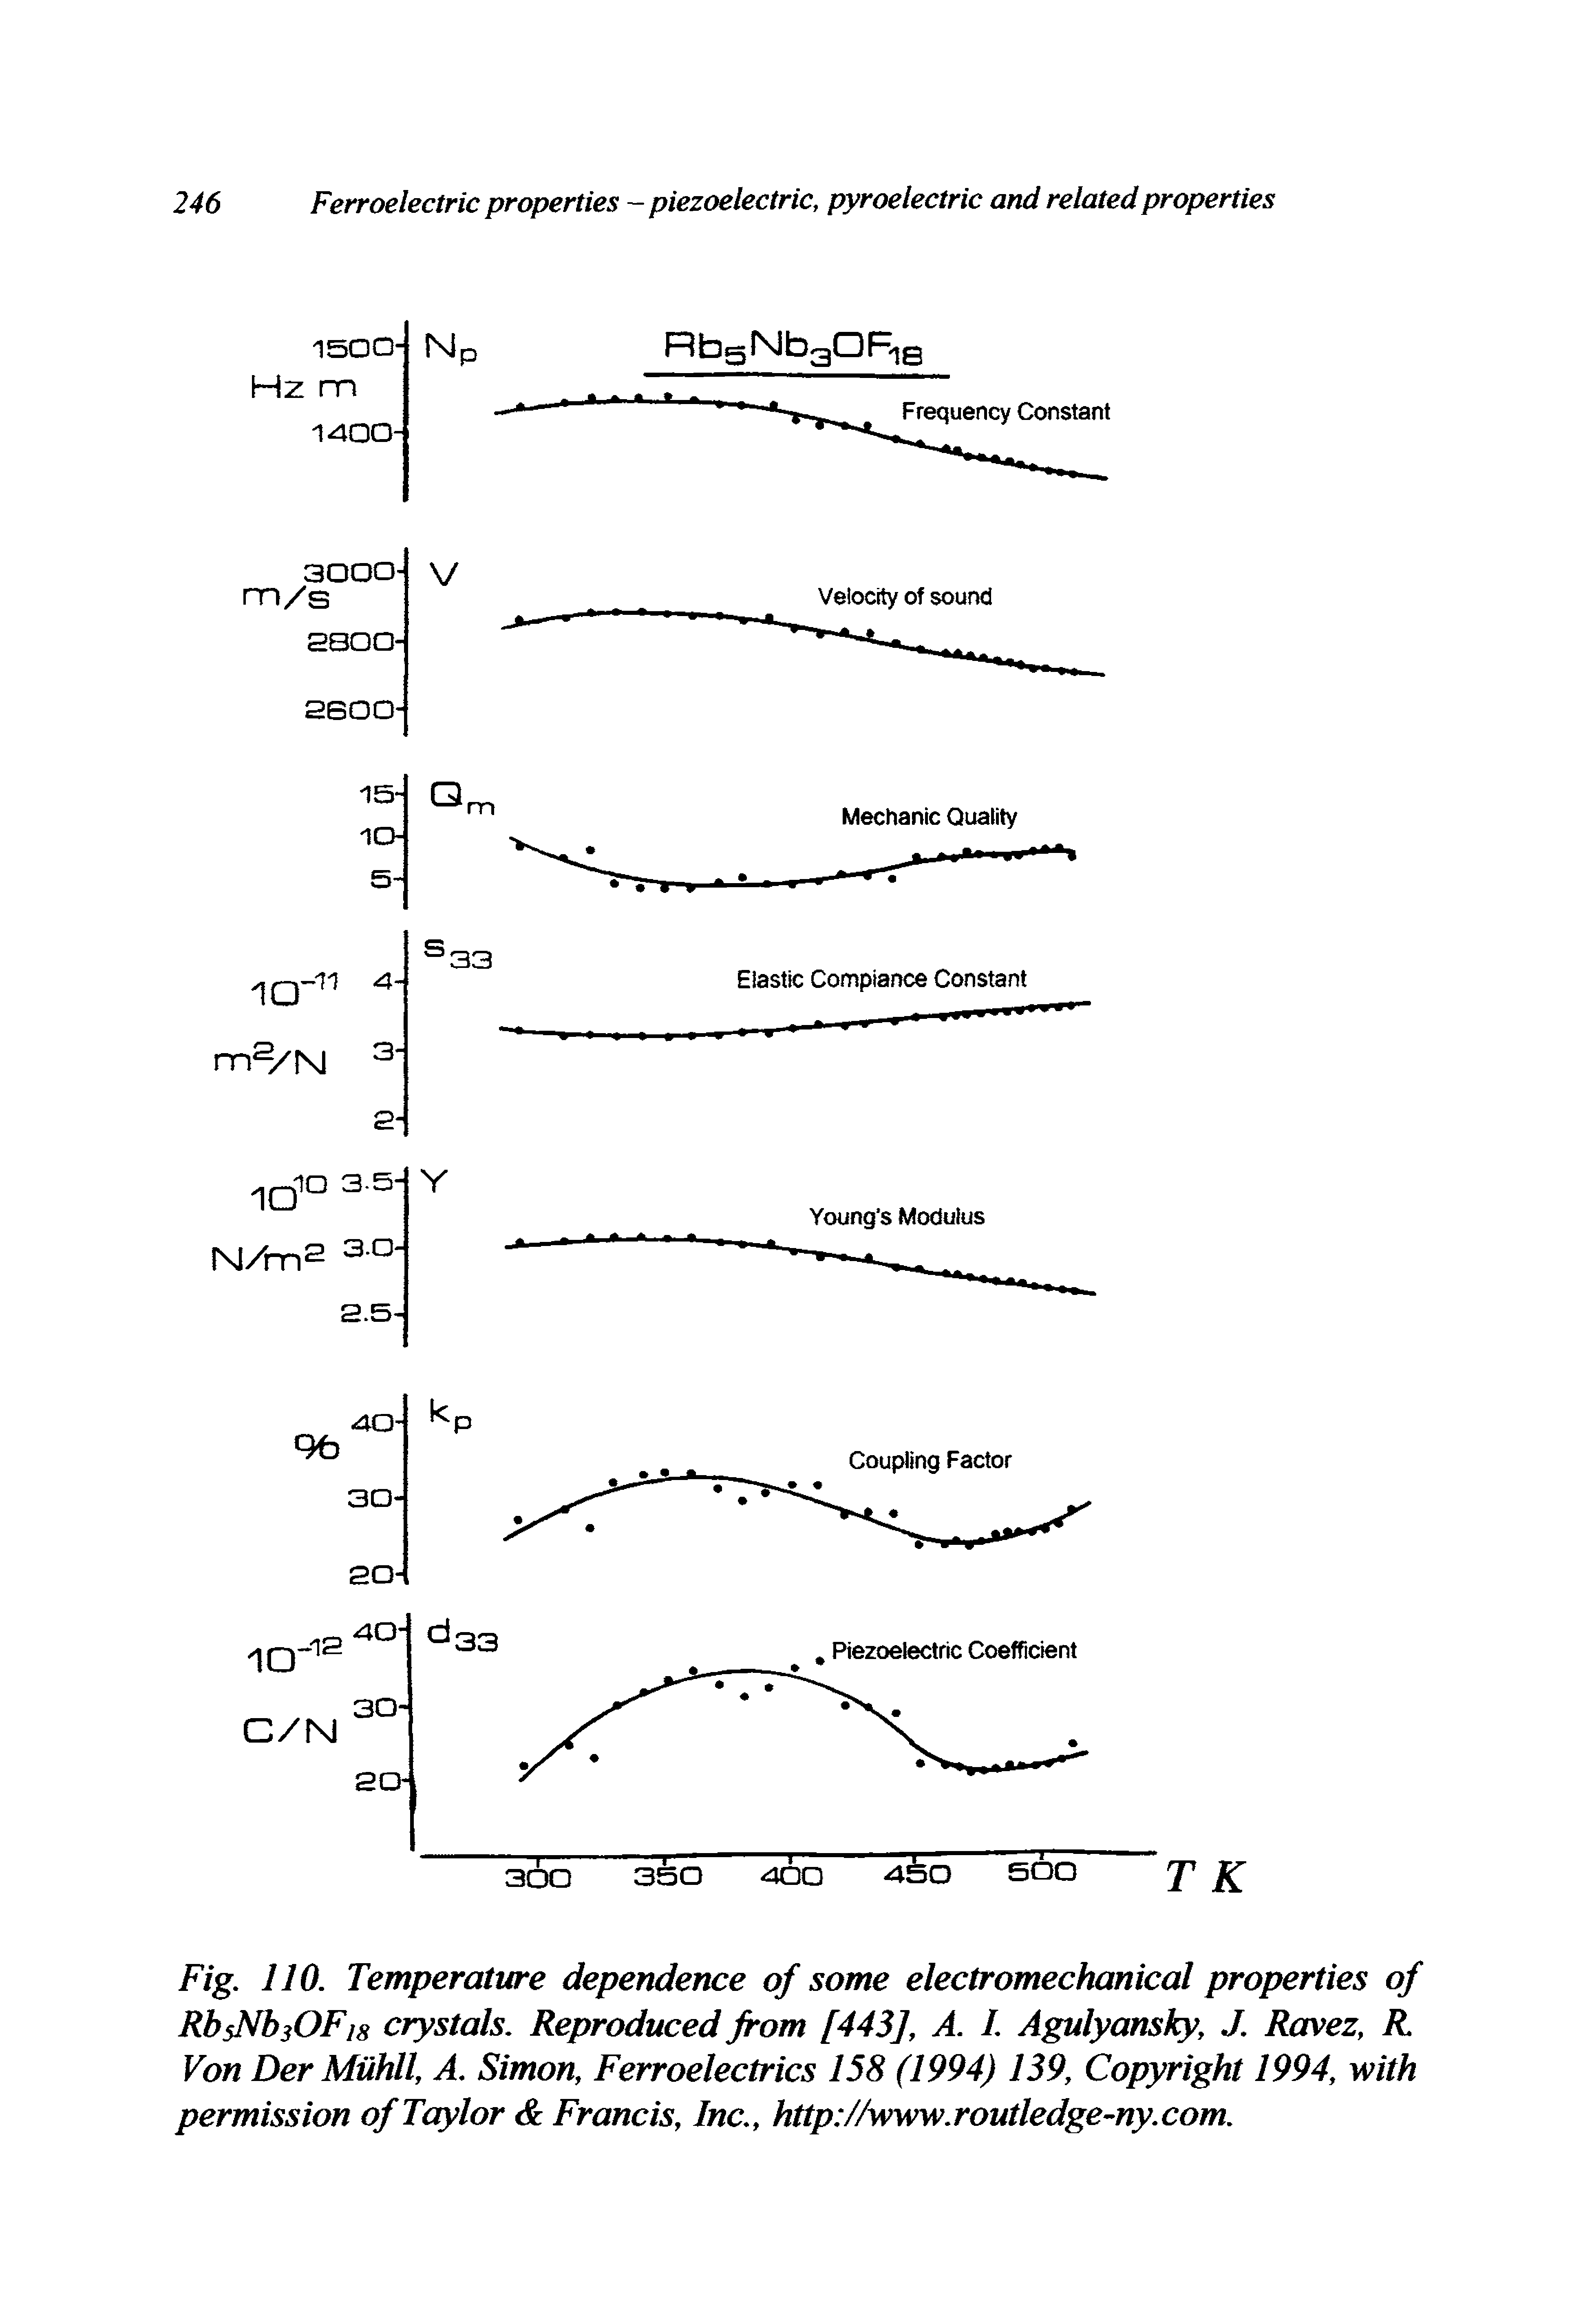 Fig. 110. Temperature dependence of some electromechanical properties of RbsNb3OFis crystals. Reproduced from [443], A. I. Agulyansky, J. Ravez, R Von DerMuhll, A. Simon, Ferroelectrics 158 (1994) 139, Copyright 1994, with permission of Taylor Francis, Inc., http //www.routledge-ny.com.